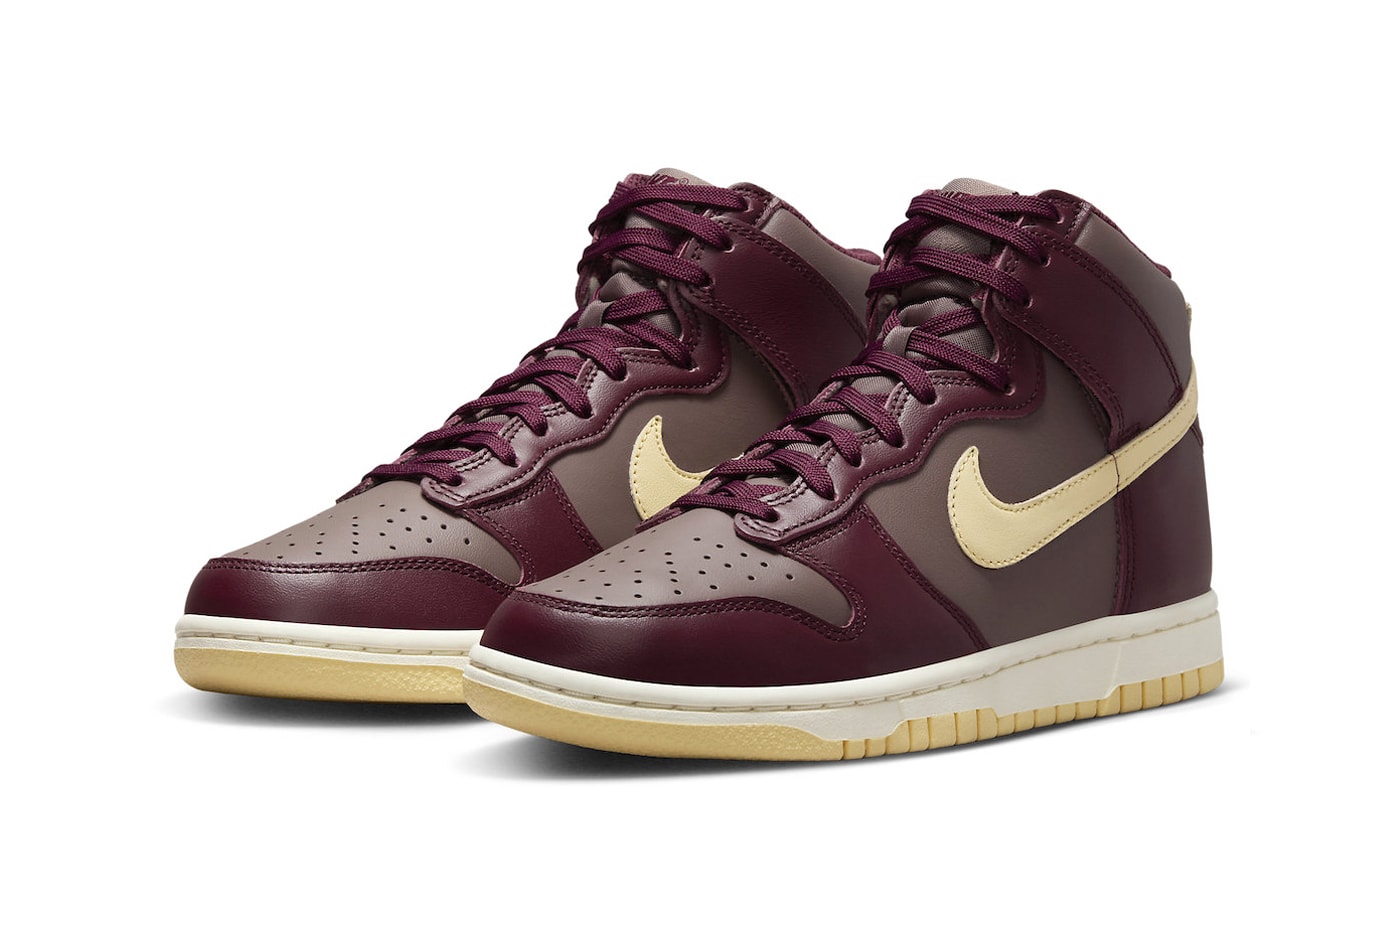 Official Look at the Nike Dunk High "Plum Eclipse" DD1869-202 Plum Eclipse/Pale Vanilla-Night Maroon high top basketball shoes swoosh